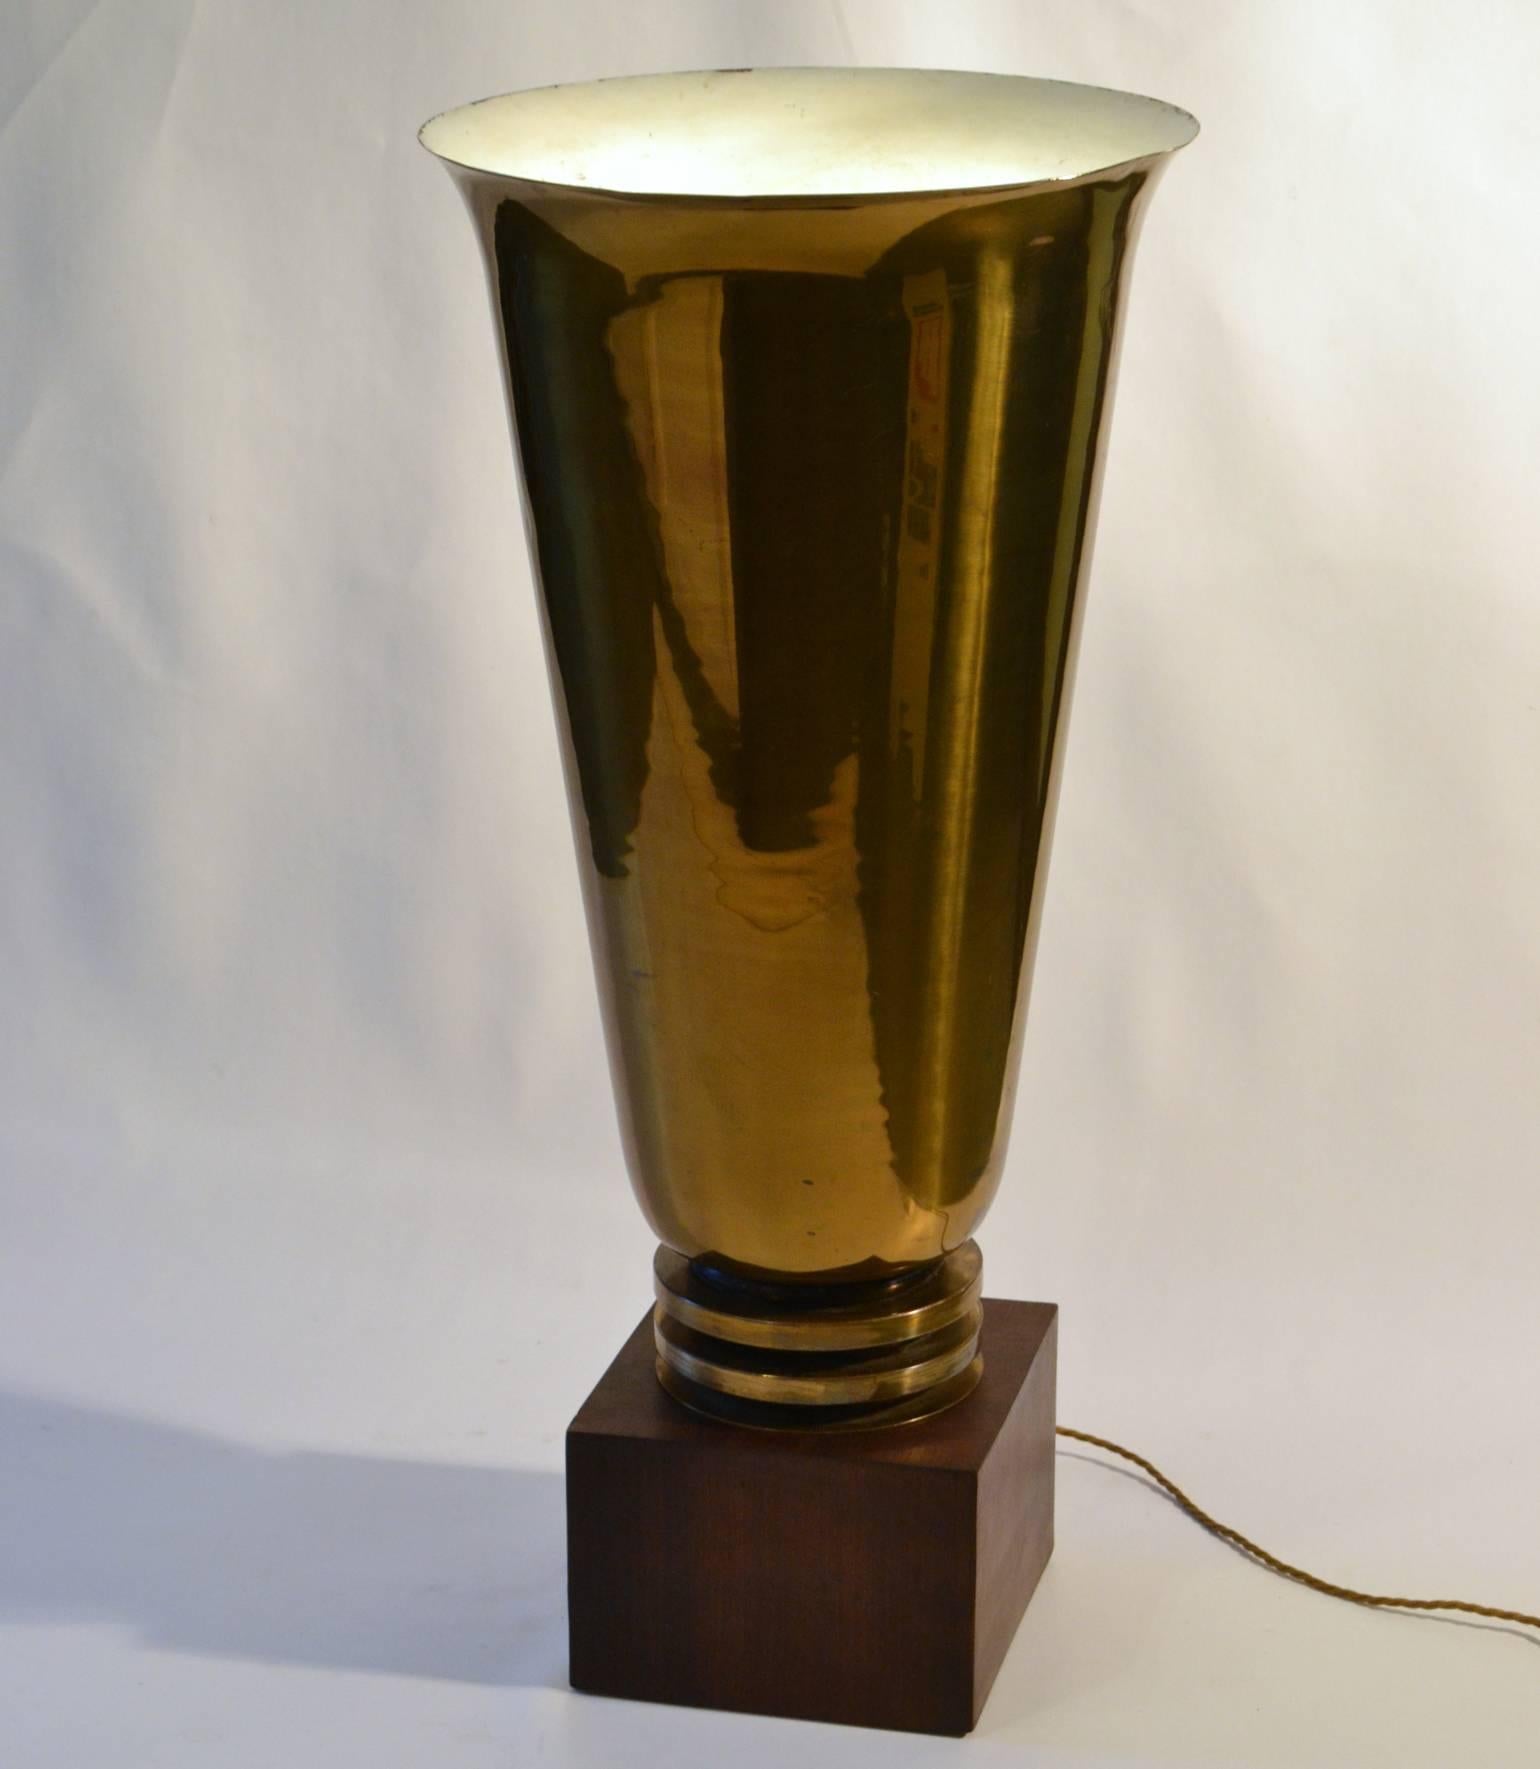 French Large Art Deco Torchiere Lamp in Brass from France, 1920s